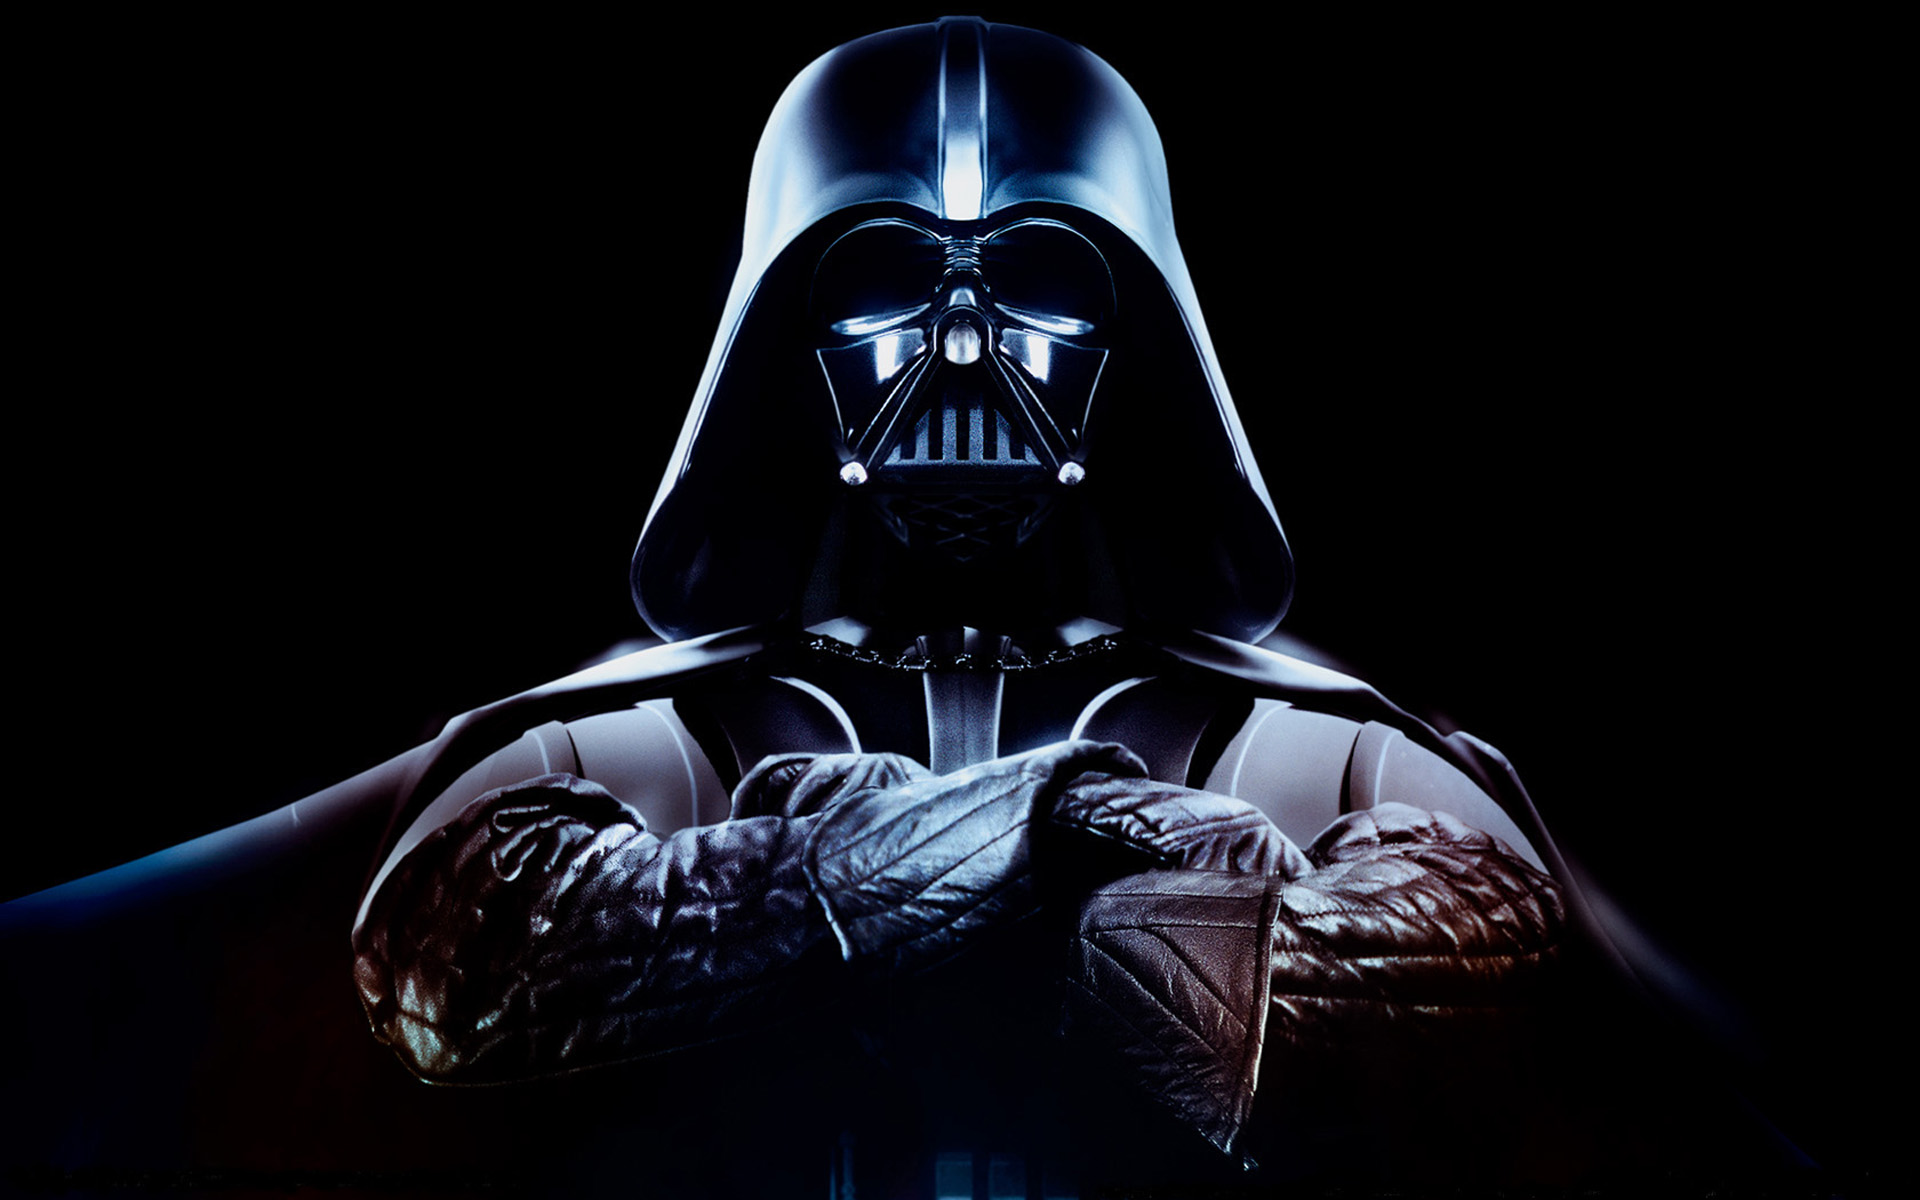 Of Star Wars Wallpaper Will Keep Your Desktop Looking Awesome